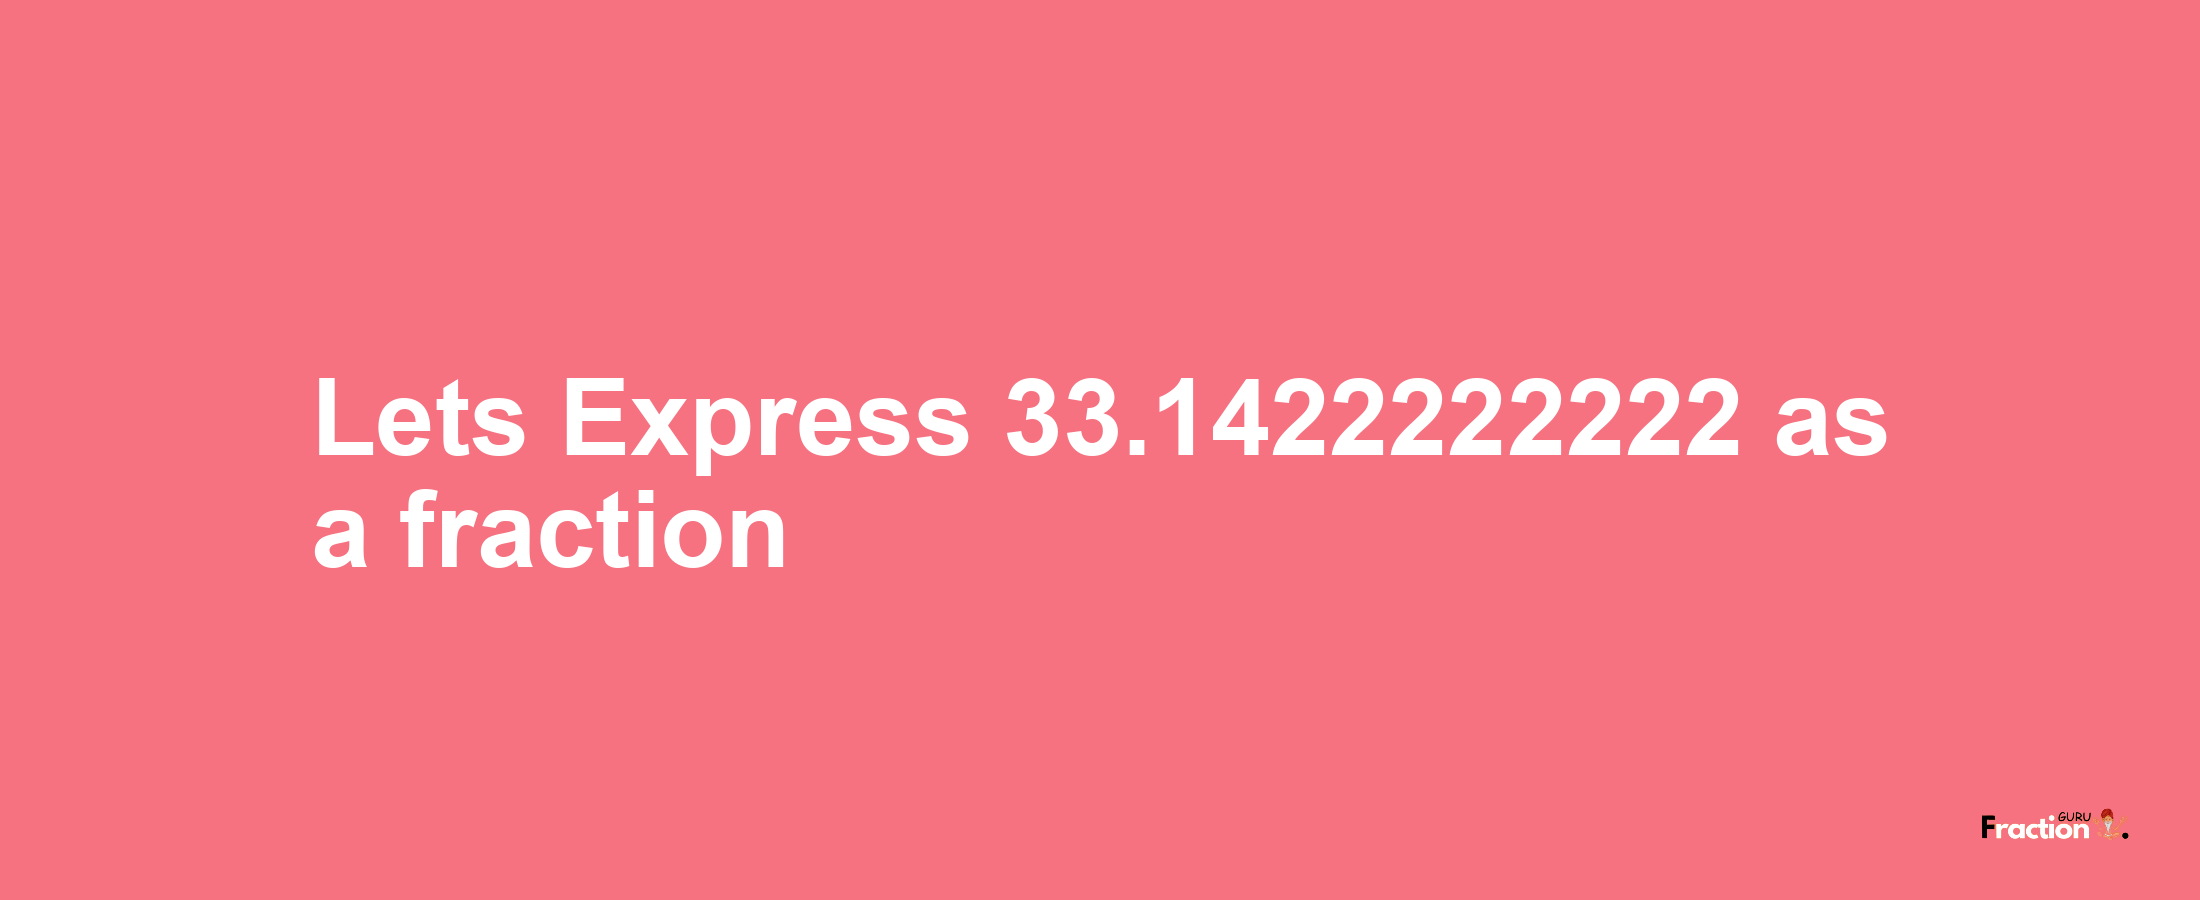 Lets Express 33.1422222222 as afraction